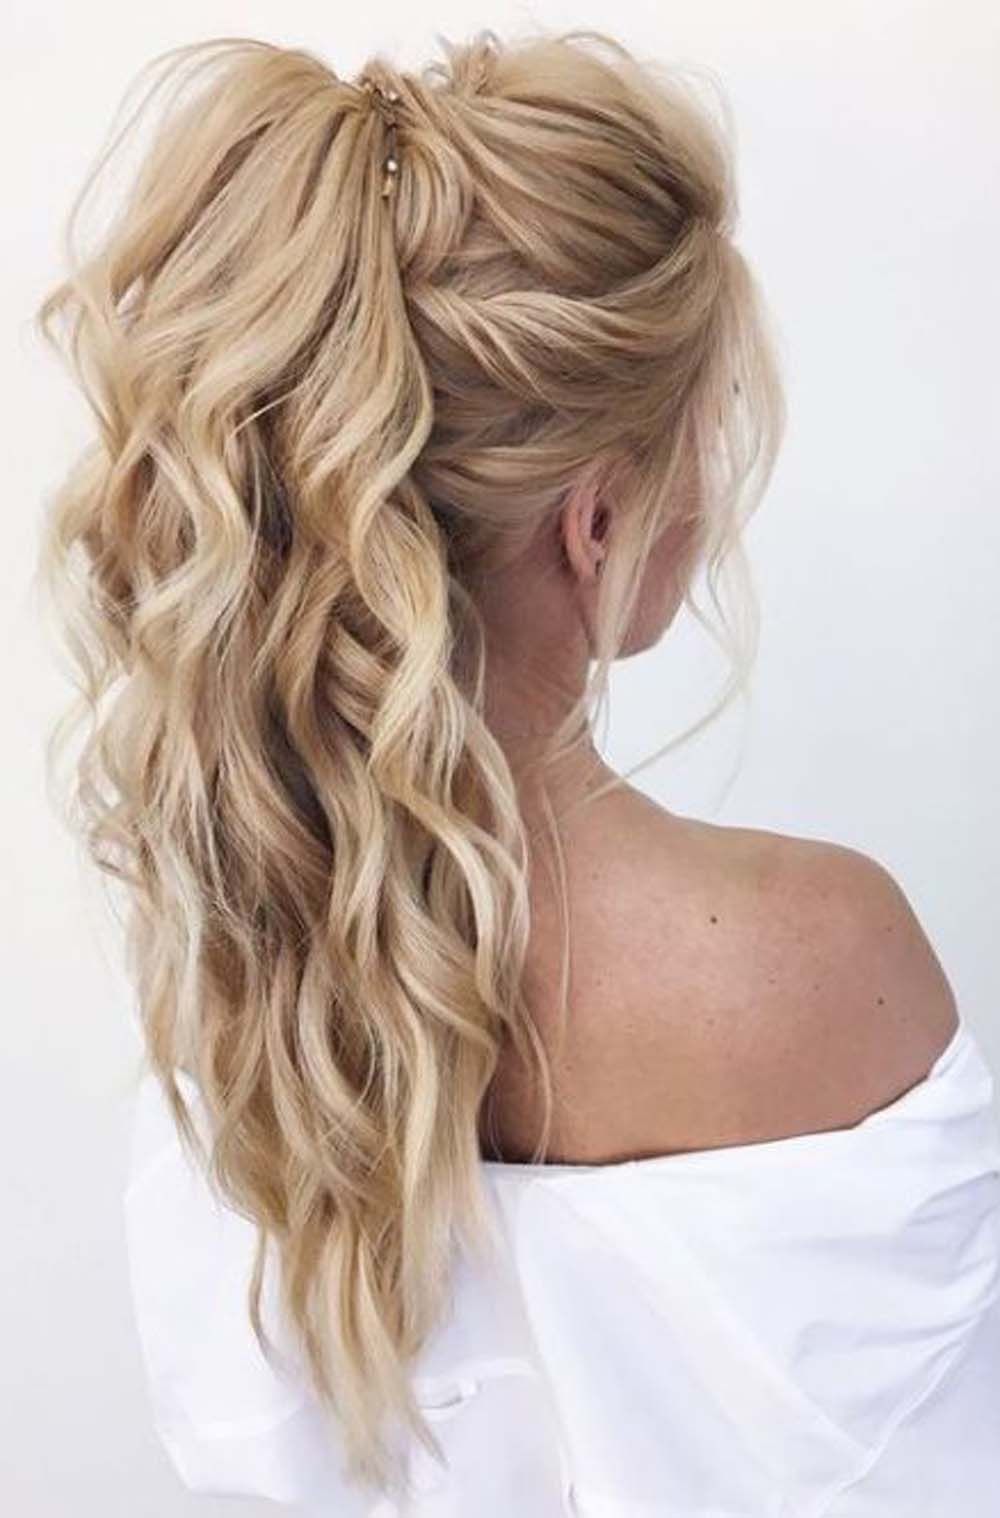 10 Best Prom Hairstyles For Long Hair #promhairupdo -   14 hair Prom night ideas